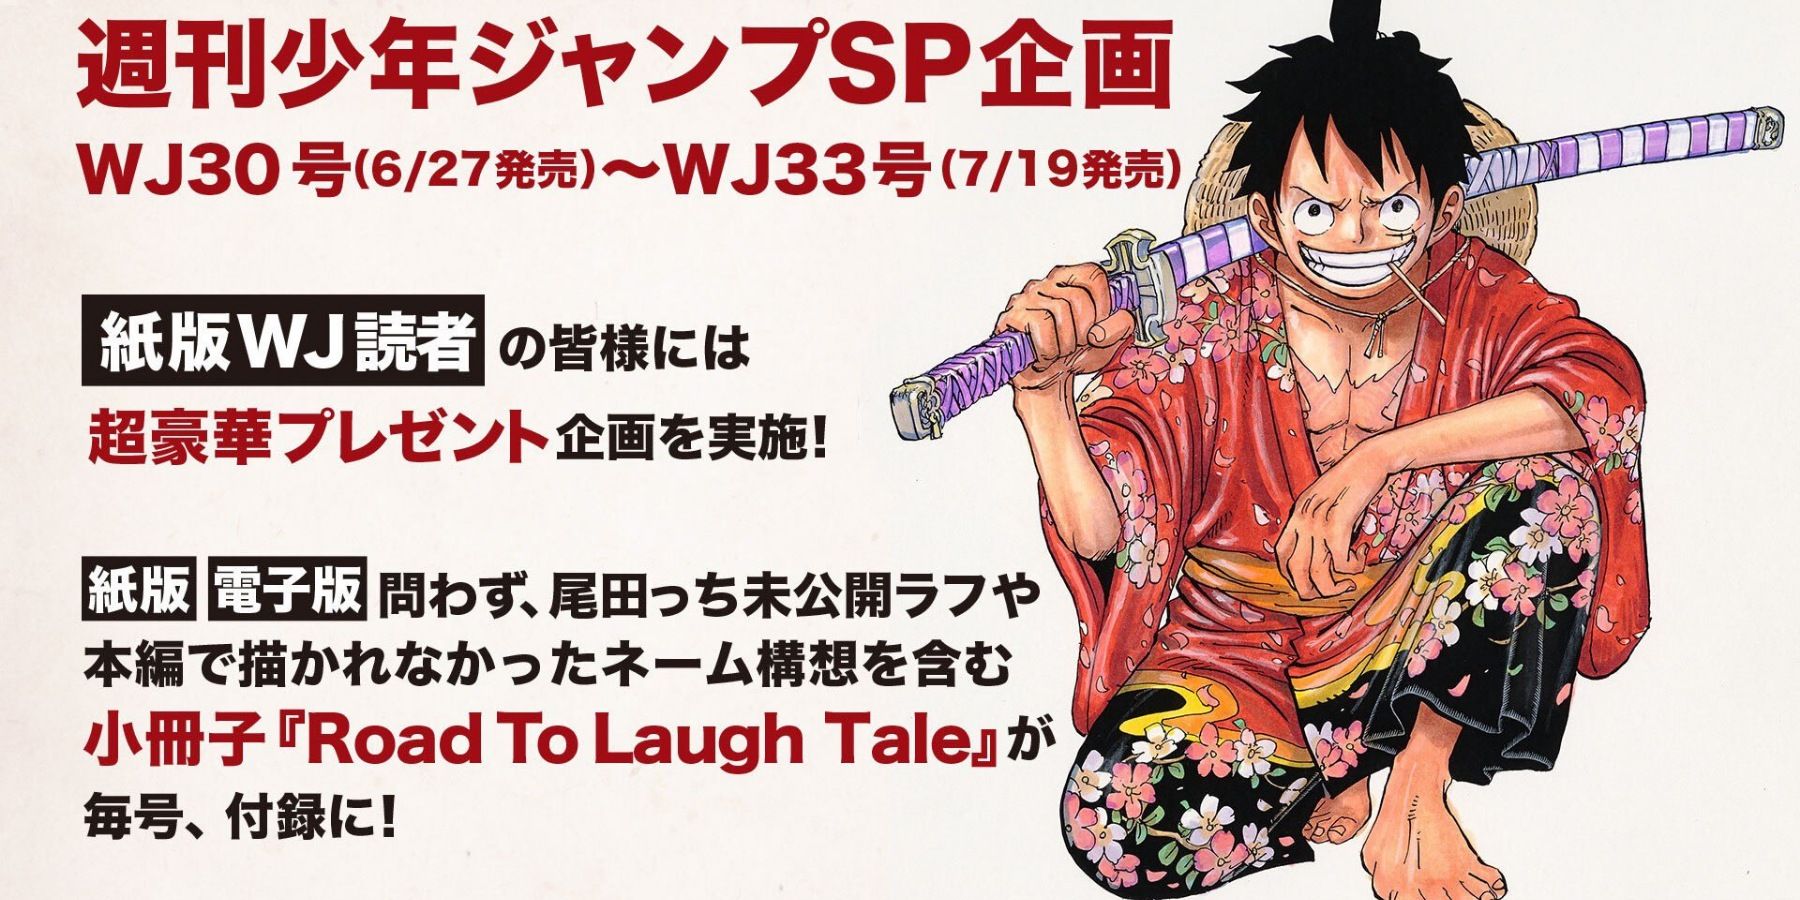 Road To Laugh Tale One Piece Scrapped Ideas